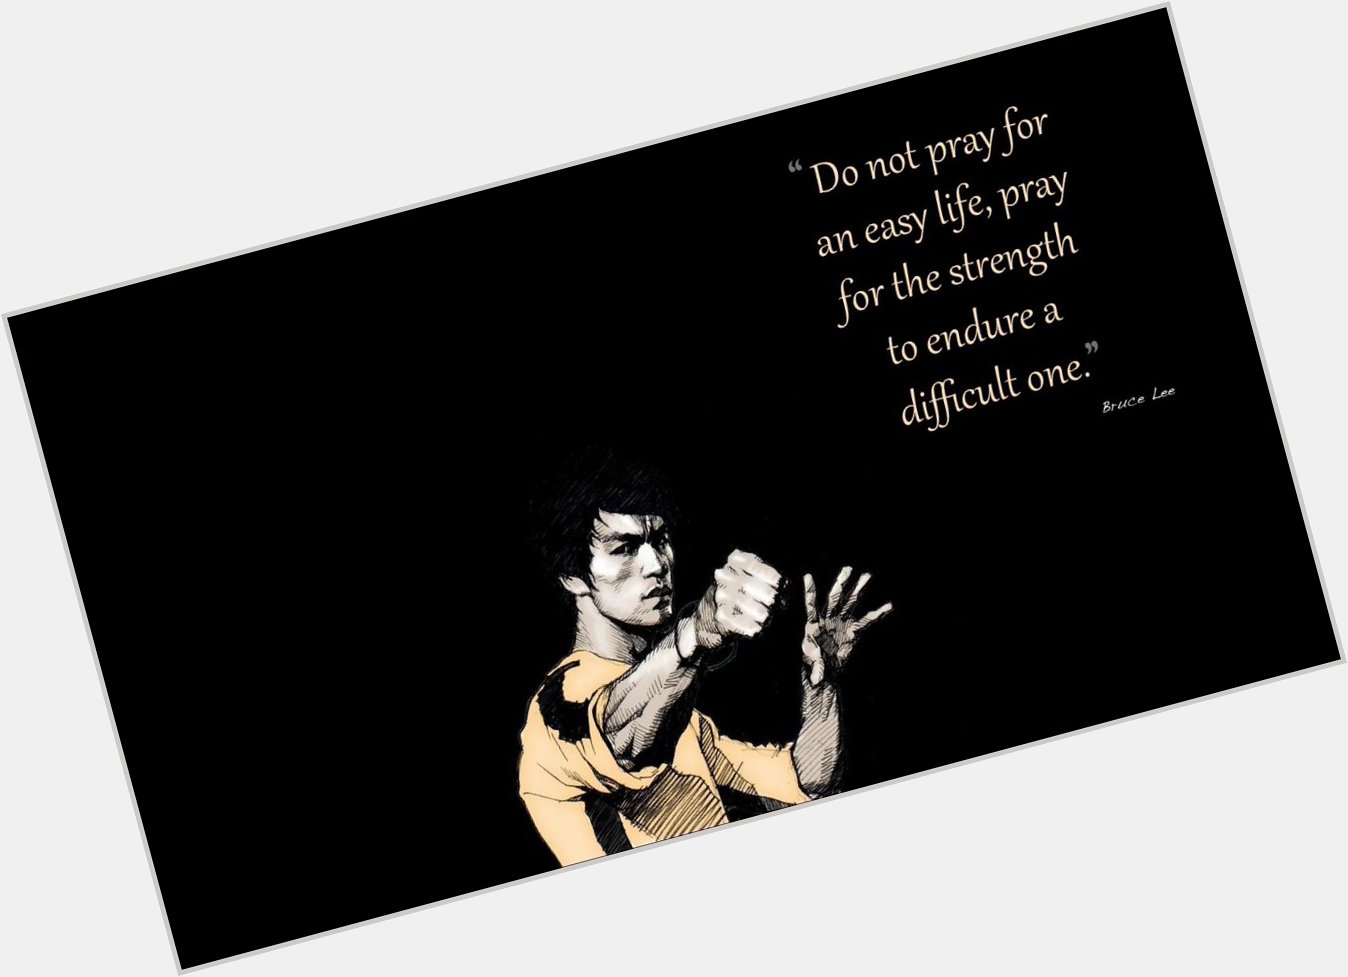 Happy Birthday Bruce Lee! Always will be one of my role models. 